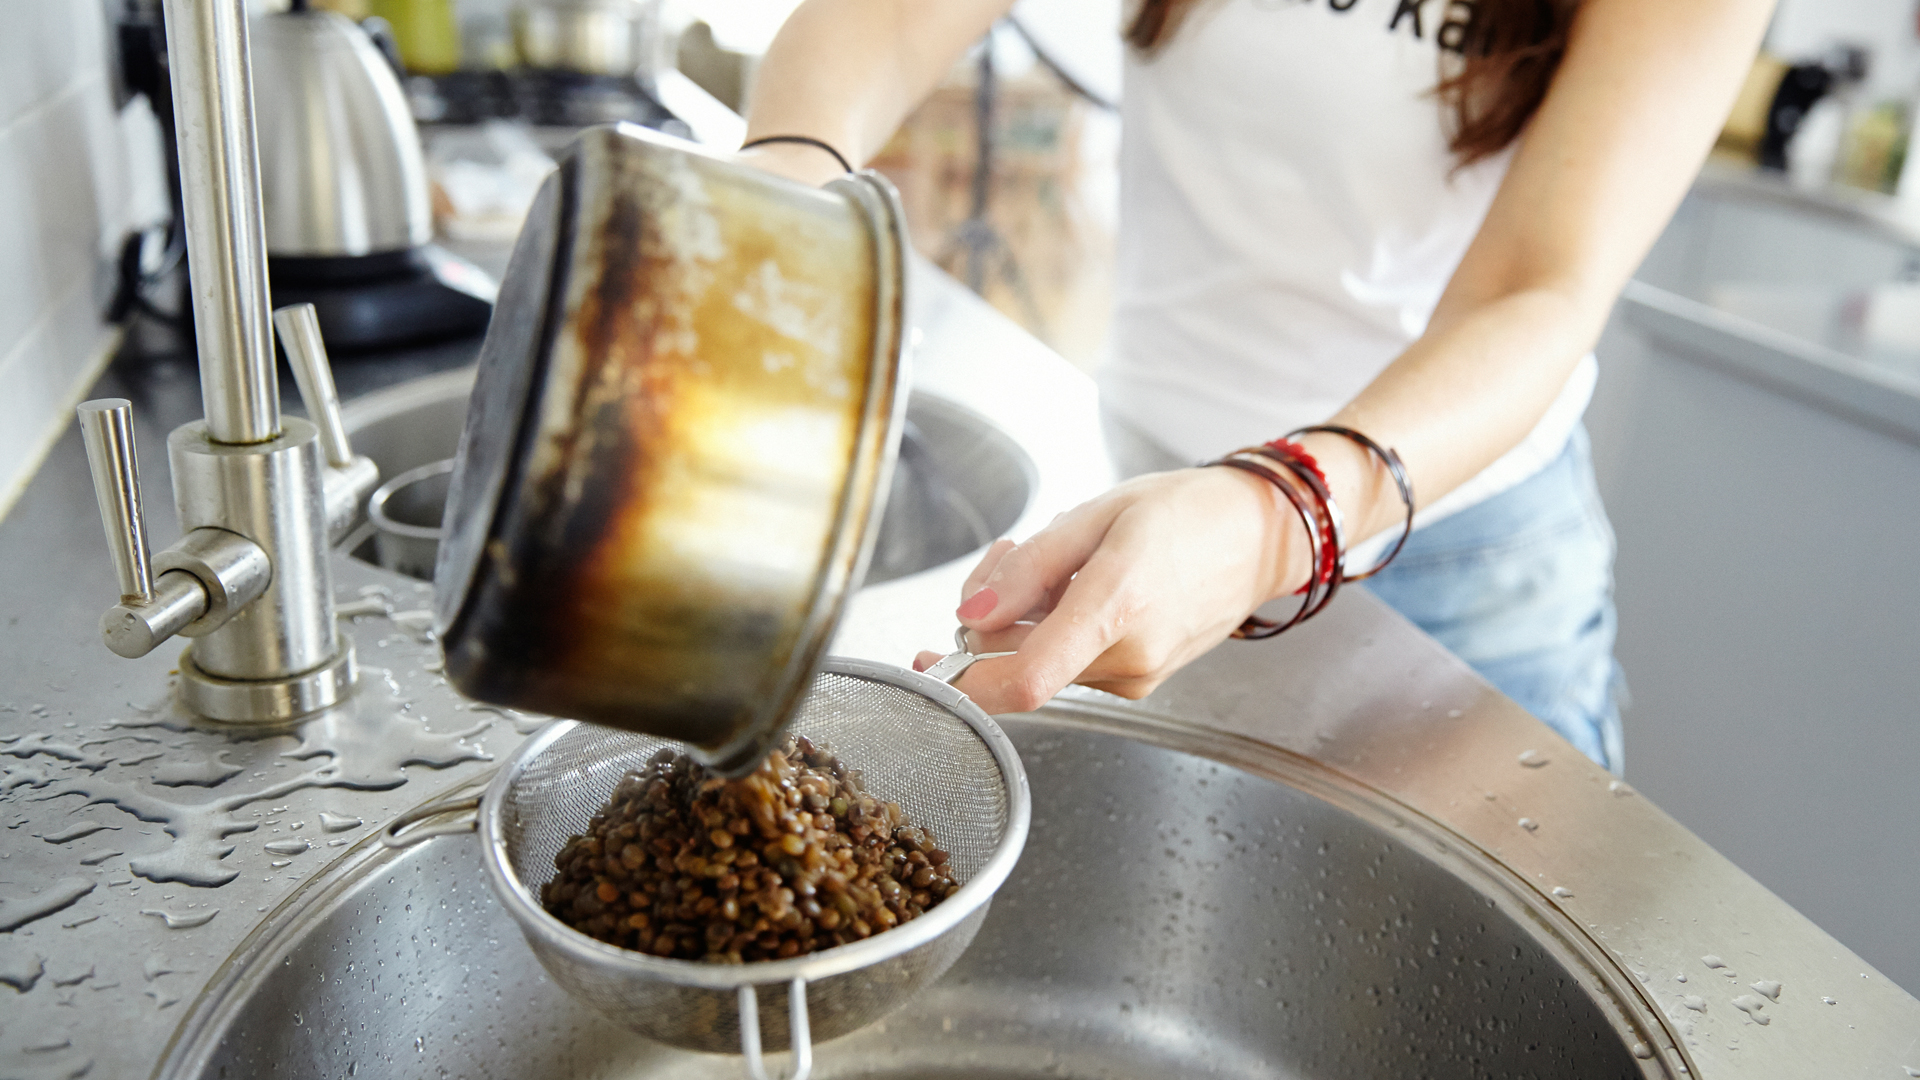 catherine-cuello-drains-puy-lentils-for-her-french-lentils-with-a-ton-of-herbs-recipe-foodadit